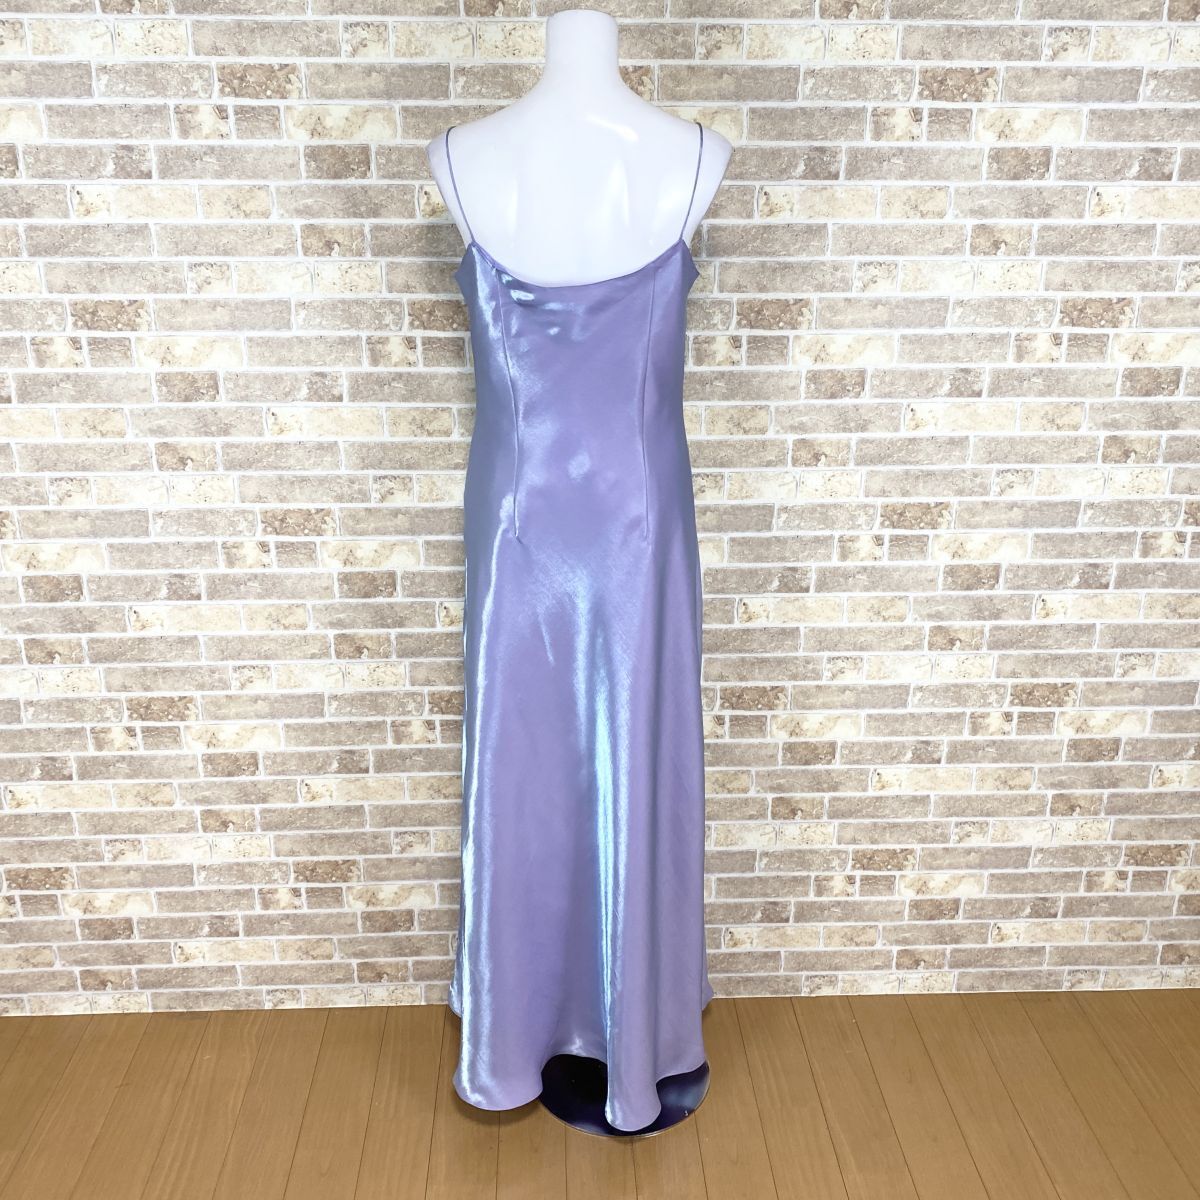 1 jpy dress cler point long Cami One-piece 13AR largish size single goods cat pohs possible purple series lustre color dress used 4772